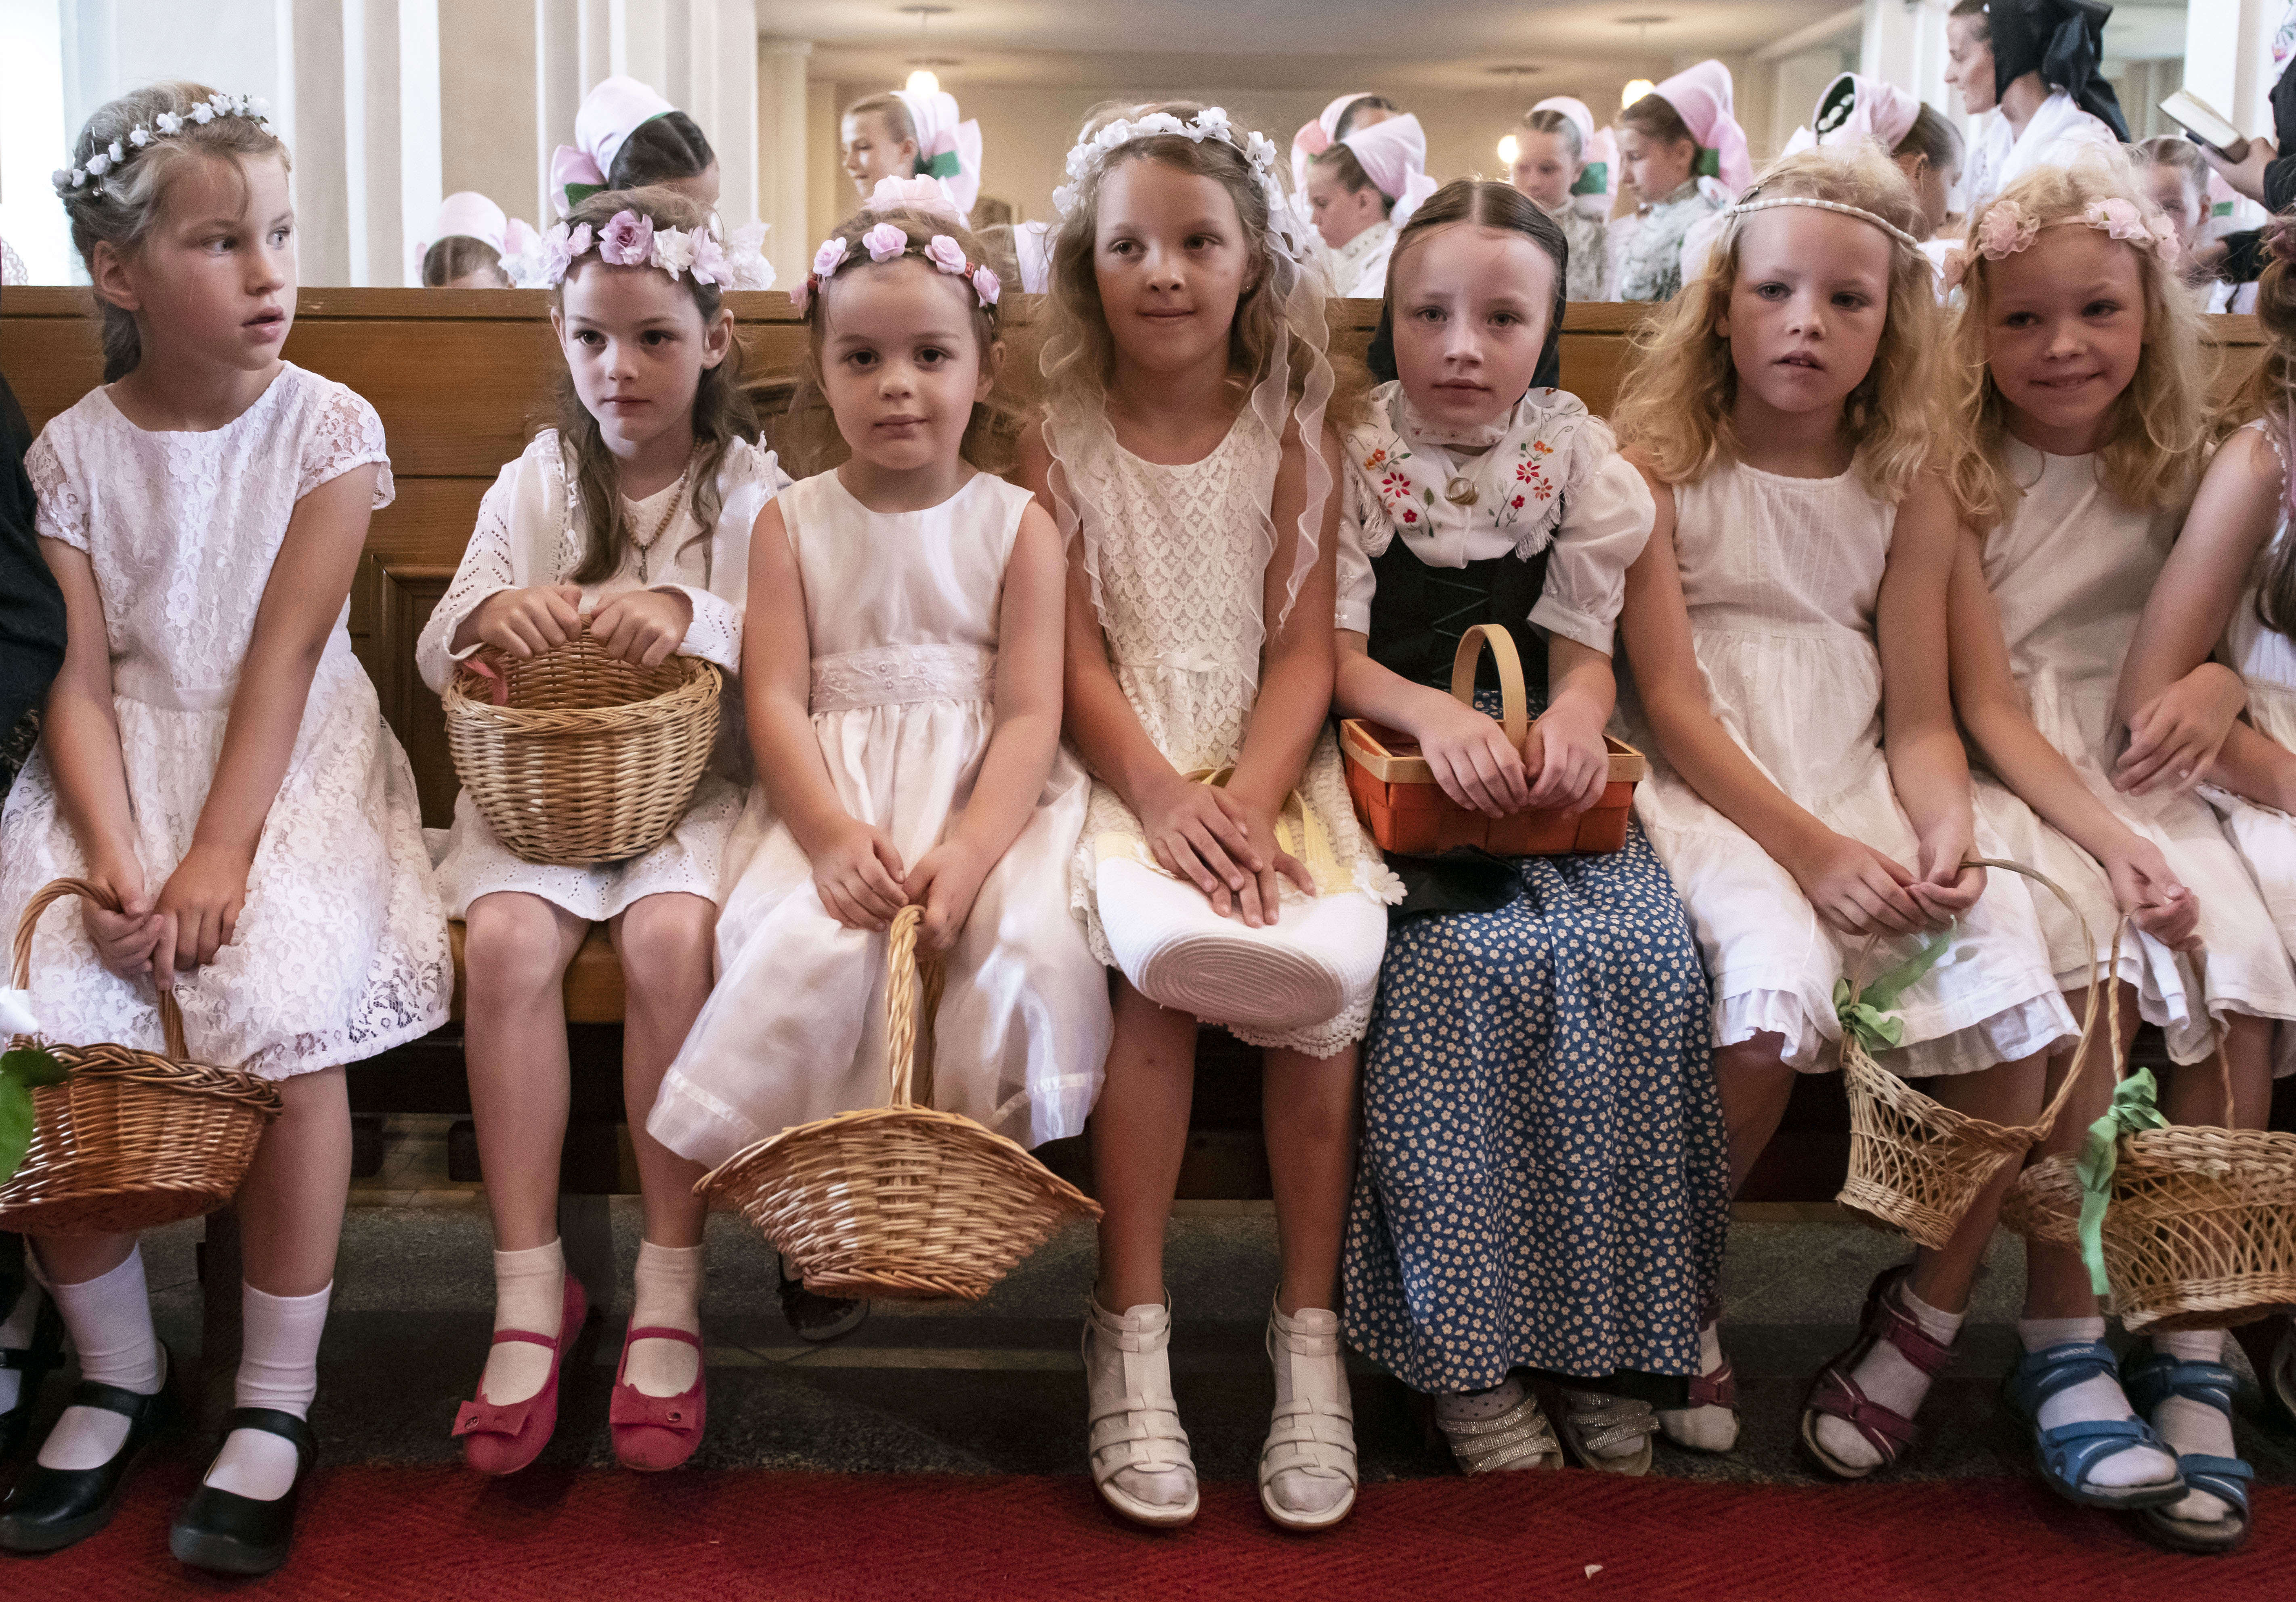 Children dressed in the traditional clothes of the Sorbs attend a holy mass during a Corpus Christi procession in Crostwitz, Germany, Thursday, June 20, 2019. The catholic faithful Sorbs are acknowledged as a national minority near the German-Polish border with their own language in eastern Germany. The procession to commemorate the solemnity of the body and blood of Christ has been a tradition in Lusatia (Lausitz) region. (AP Photo/Jens Meyer)